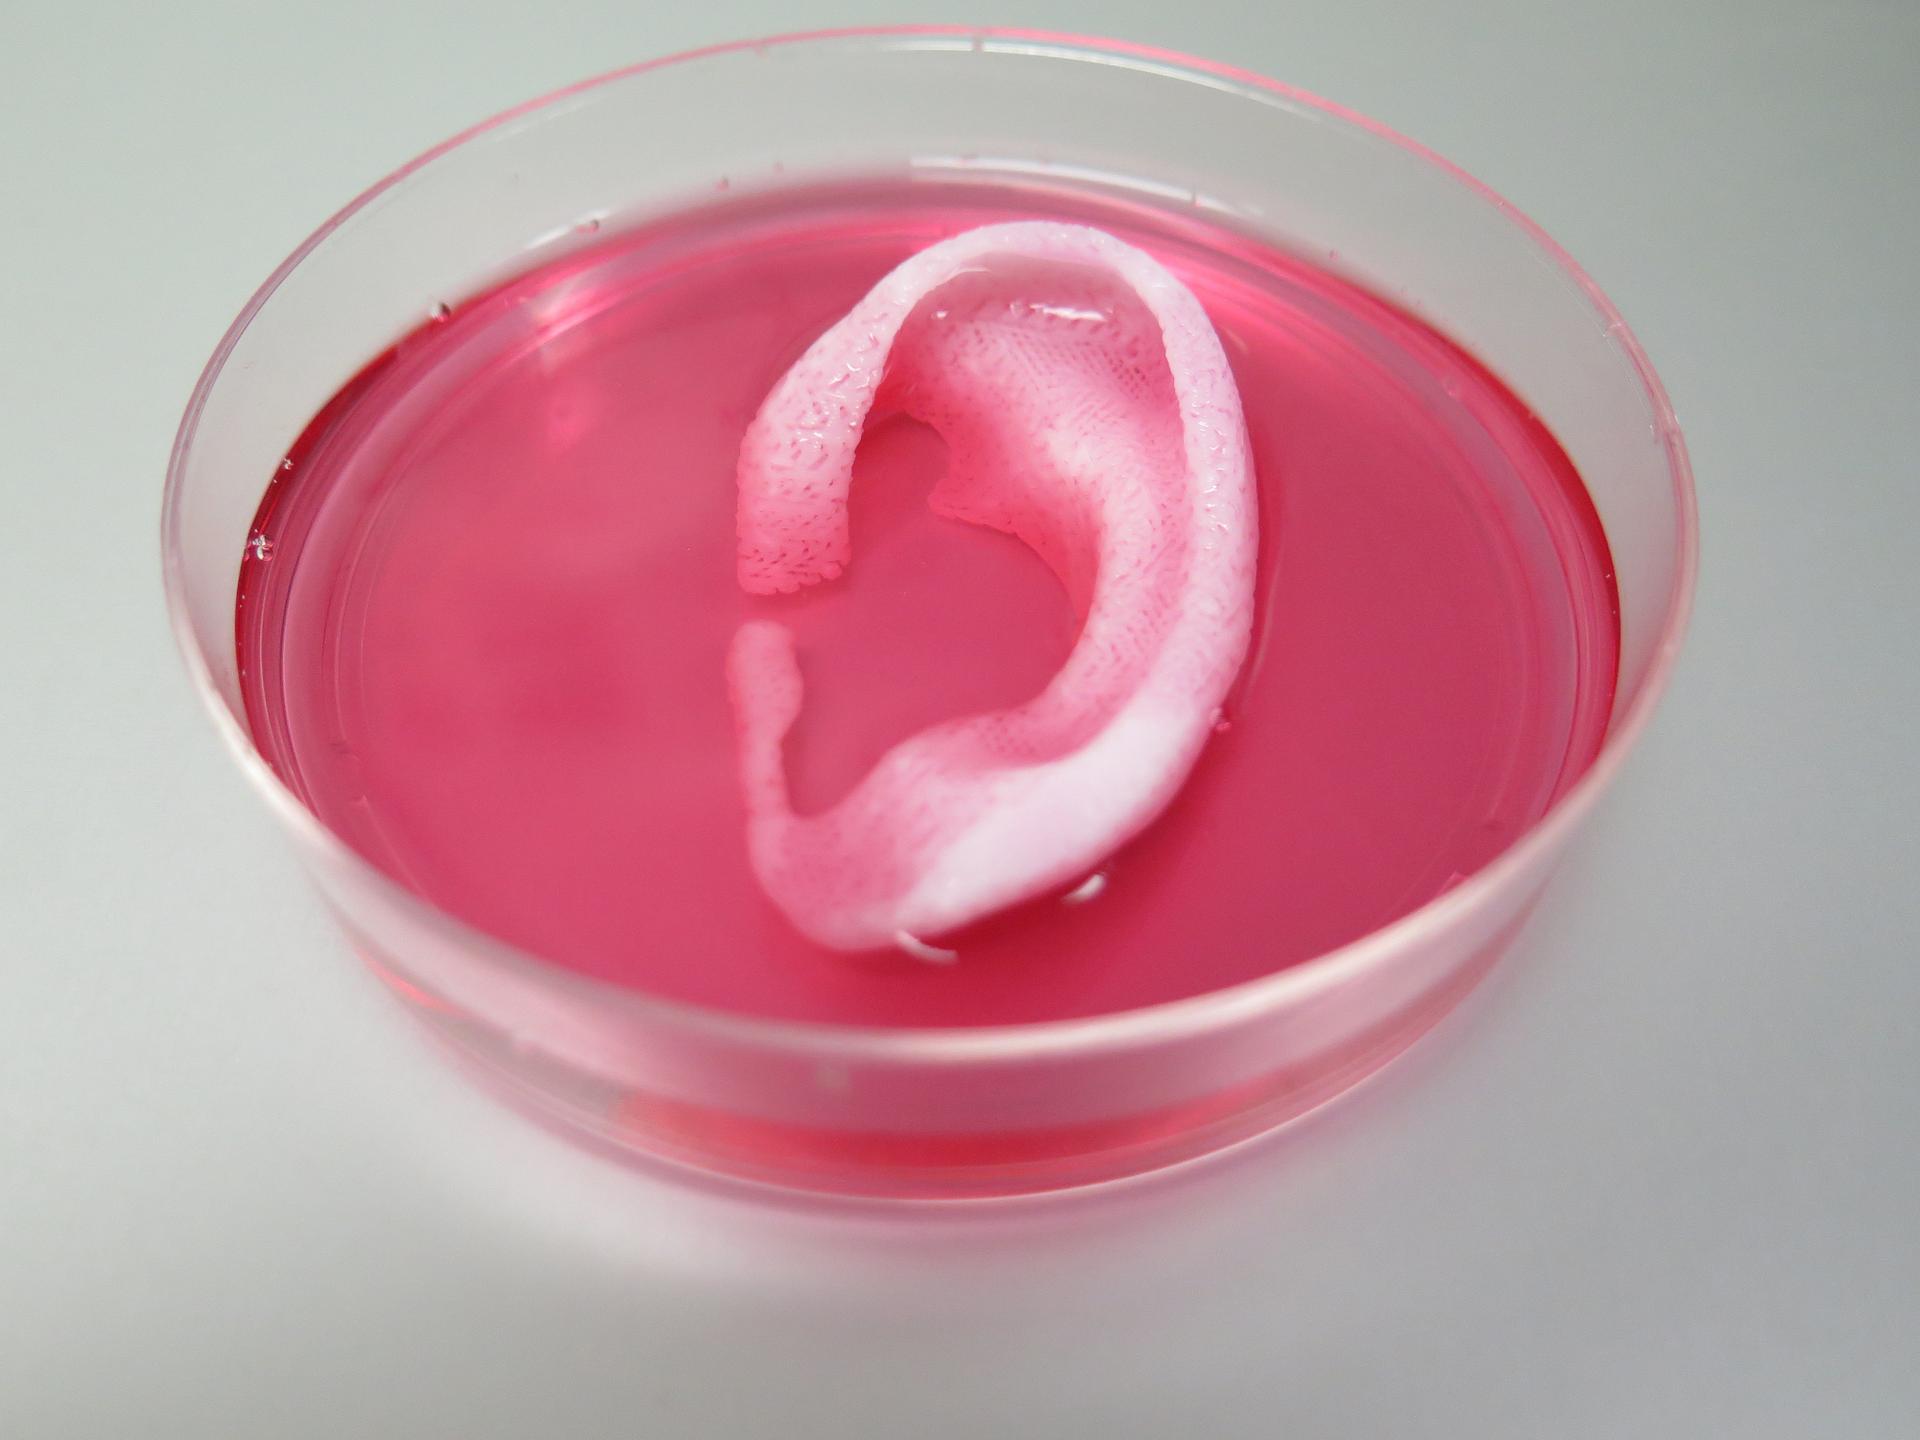 Completed ear structure printed with the Integrated Tissue-Organ Printing System